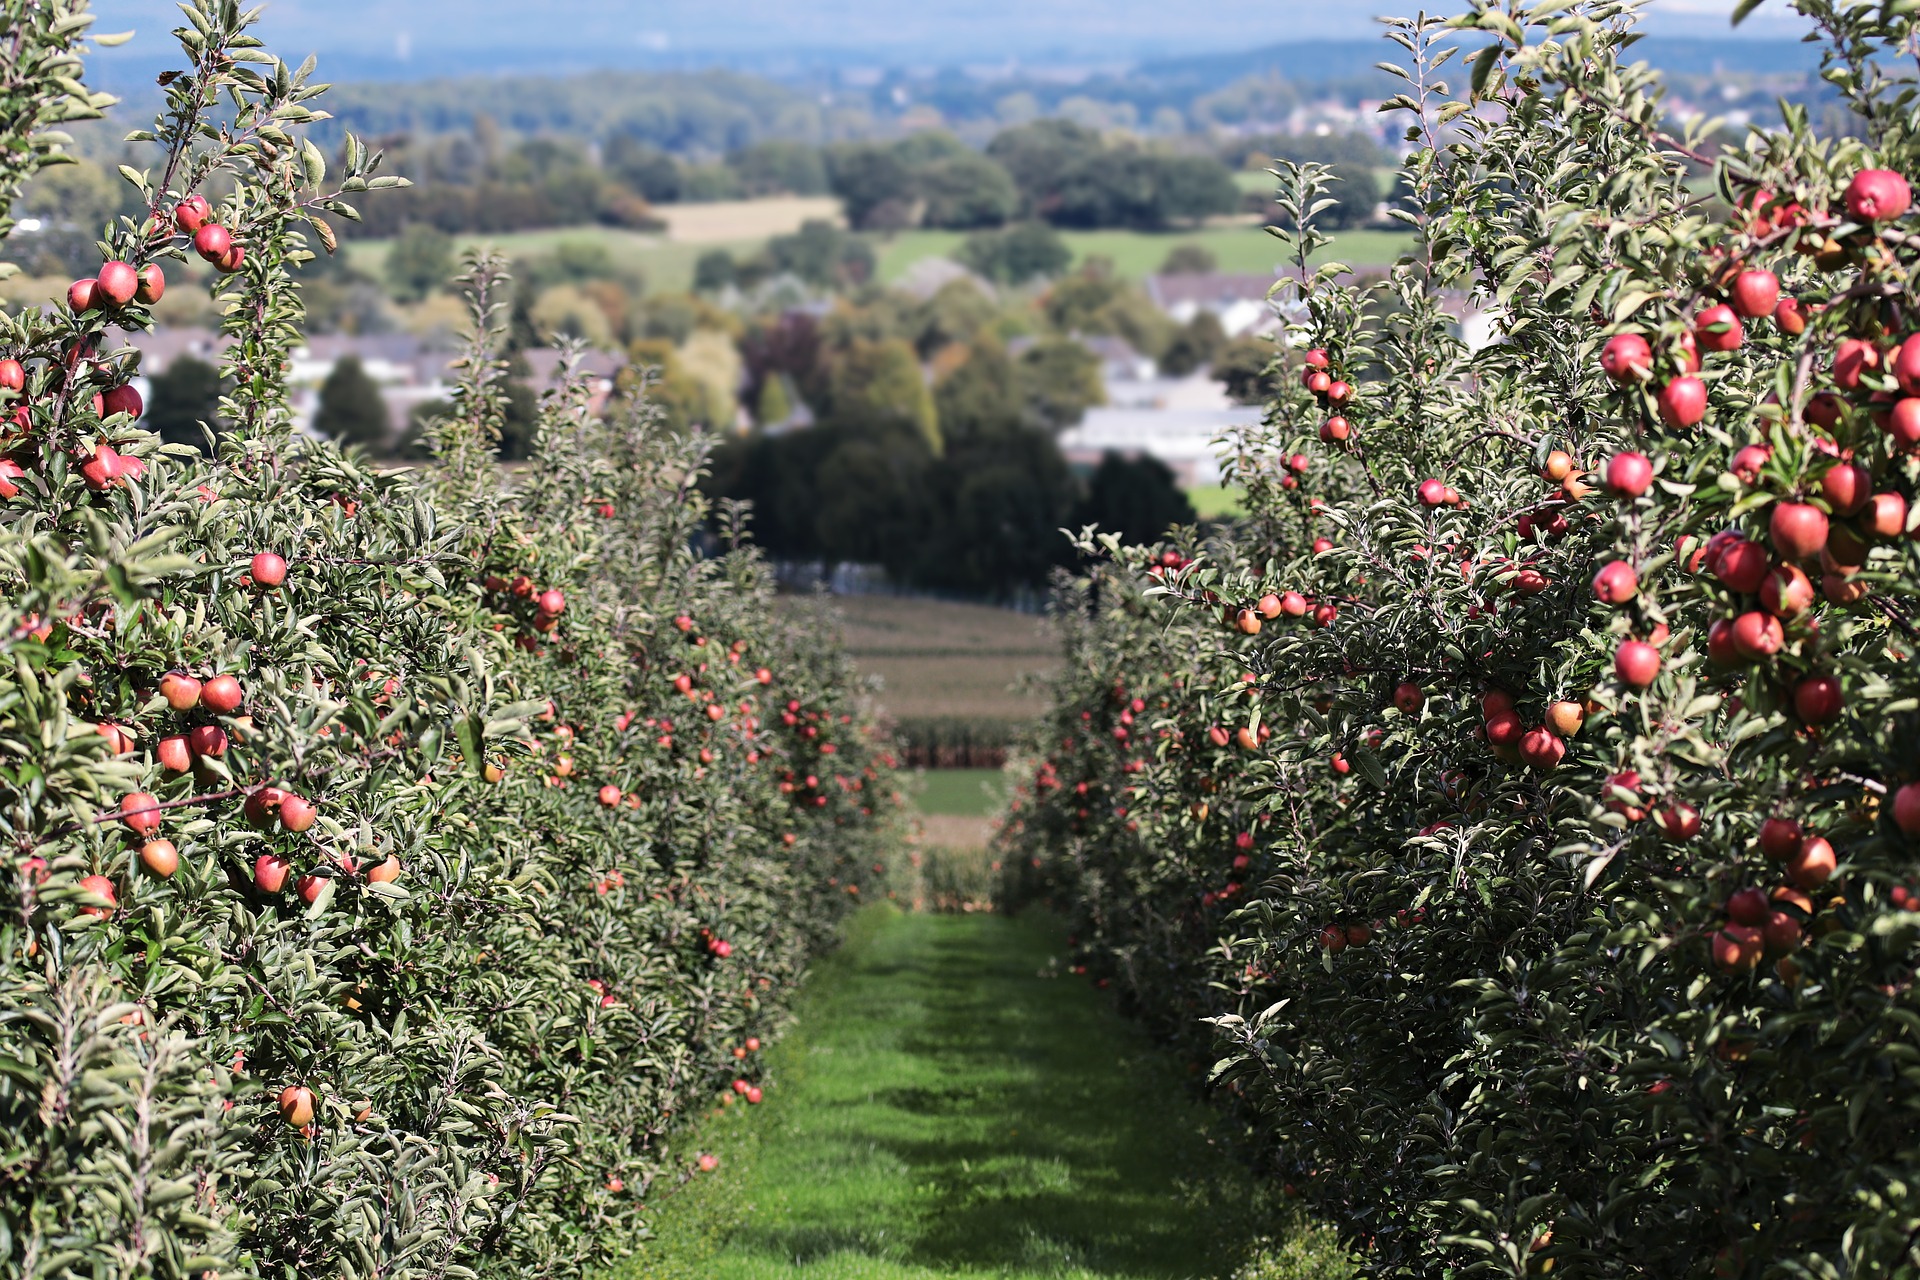 Apple trees in an apple orchard.